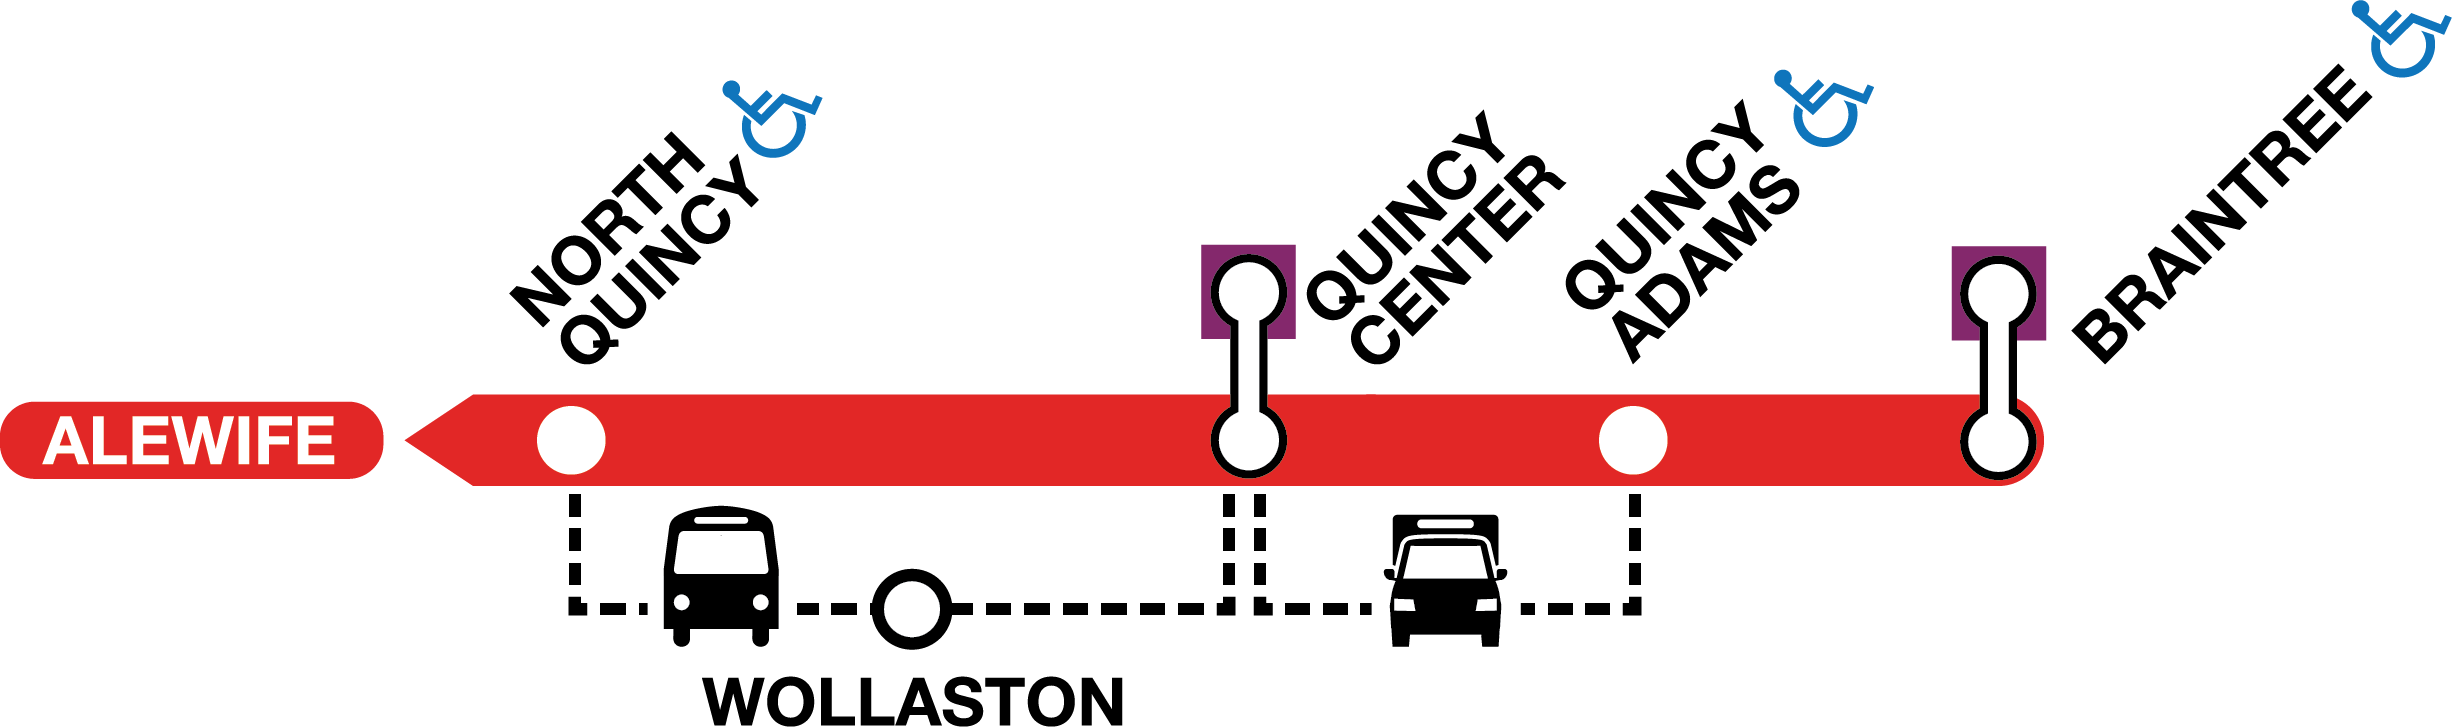 Line graphic illustrating the van and bus shuttles serving Quincy Center.